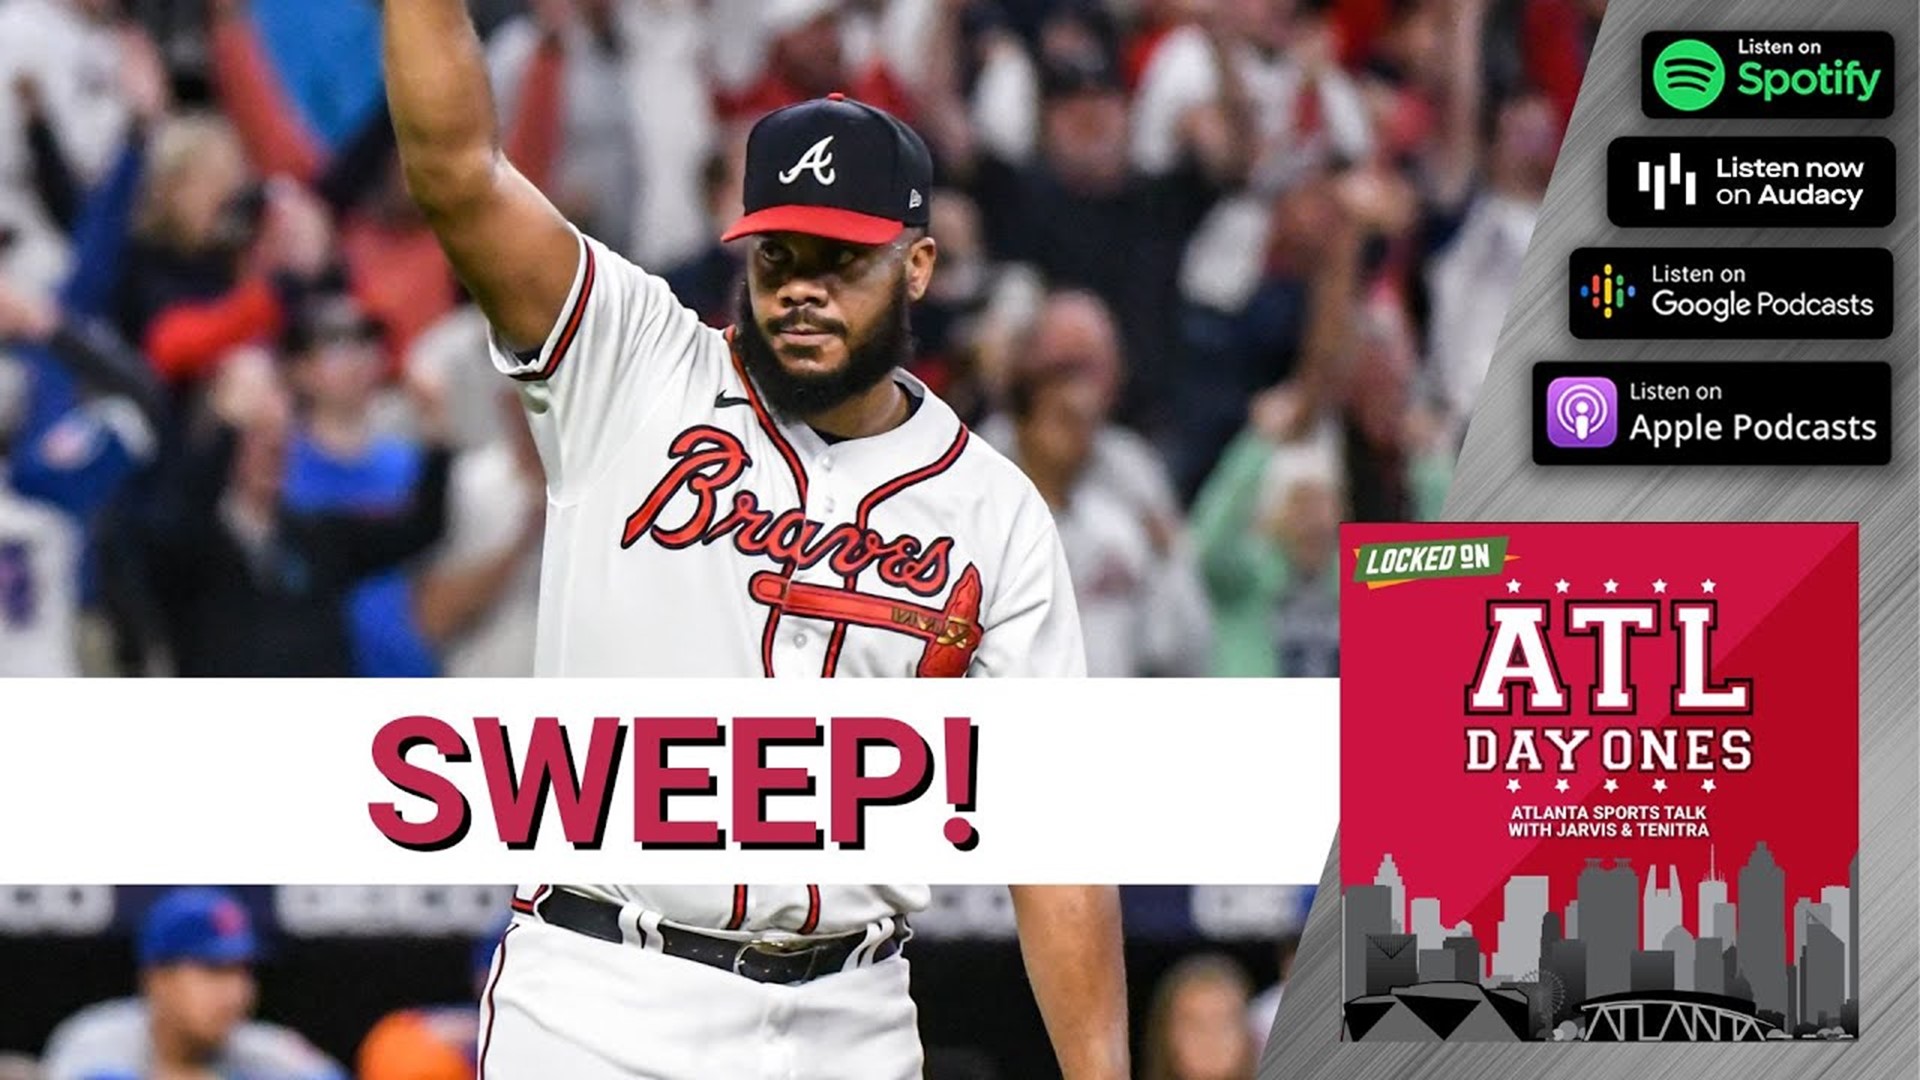 The Atlanta Braves Swept The Metting Mets! | ATL Day Ones With Jarvis n Tenitra